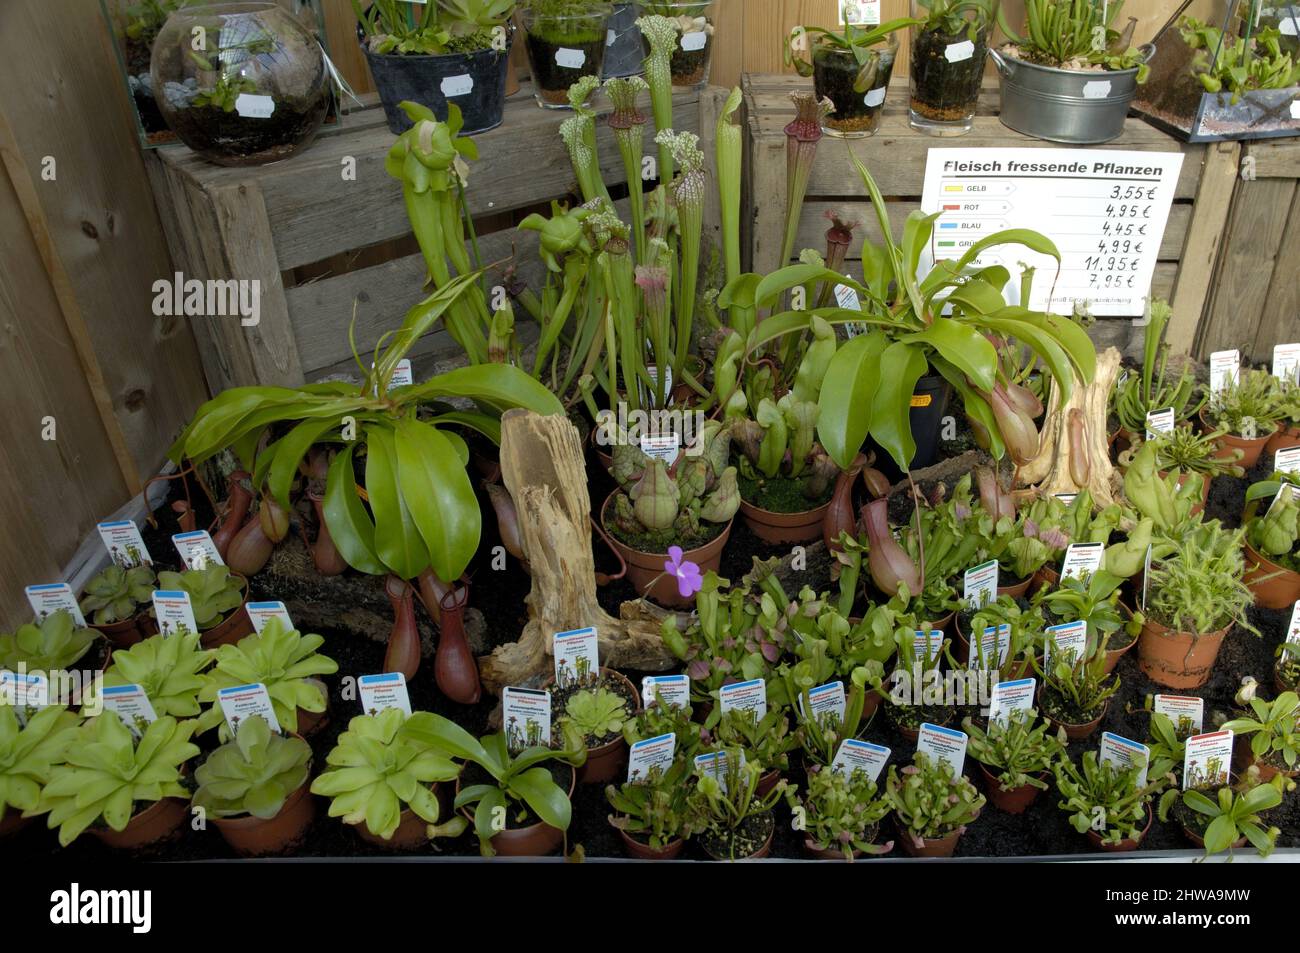 carnivorous plants to sell in a garden center, Germany Stock Photo